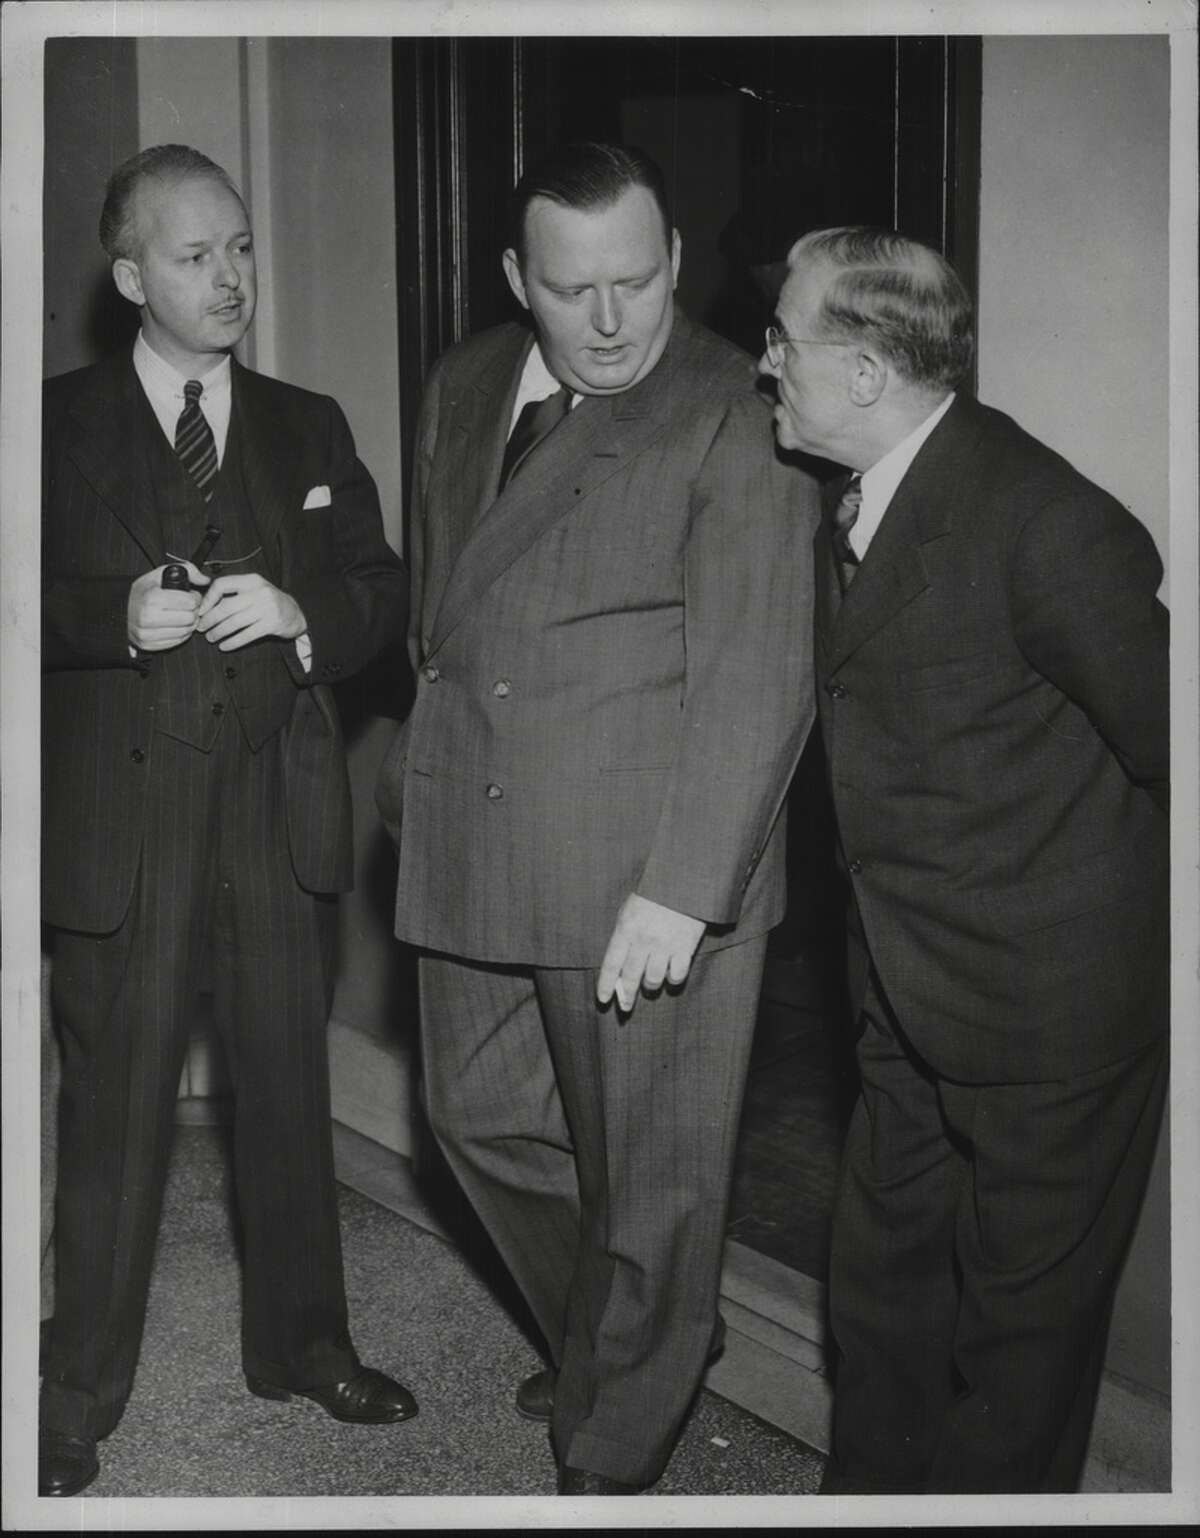 Herman Hoogkamp Years in office: 1940-1941 (Pictured right)